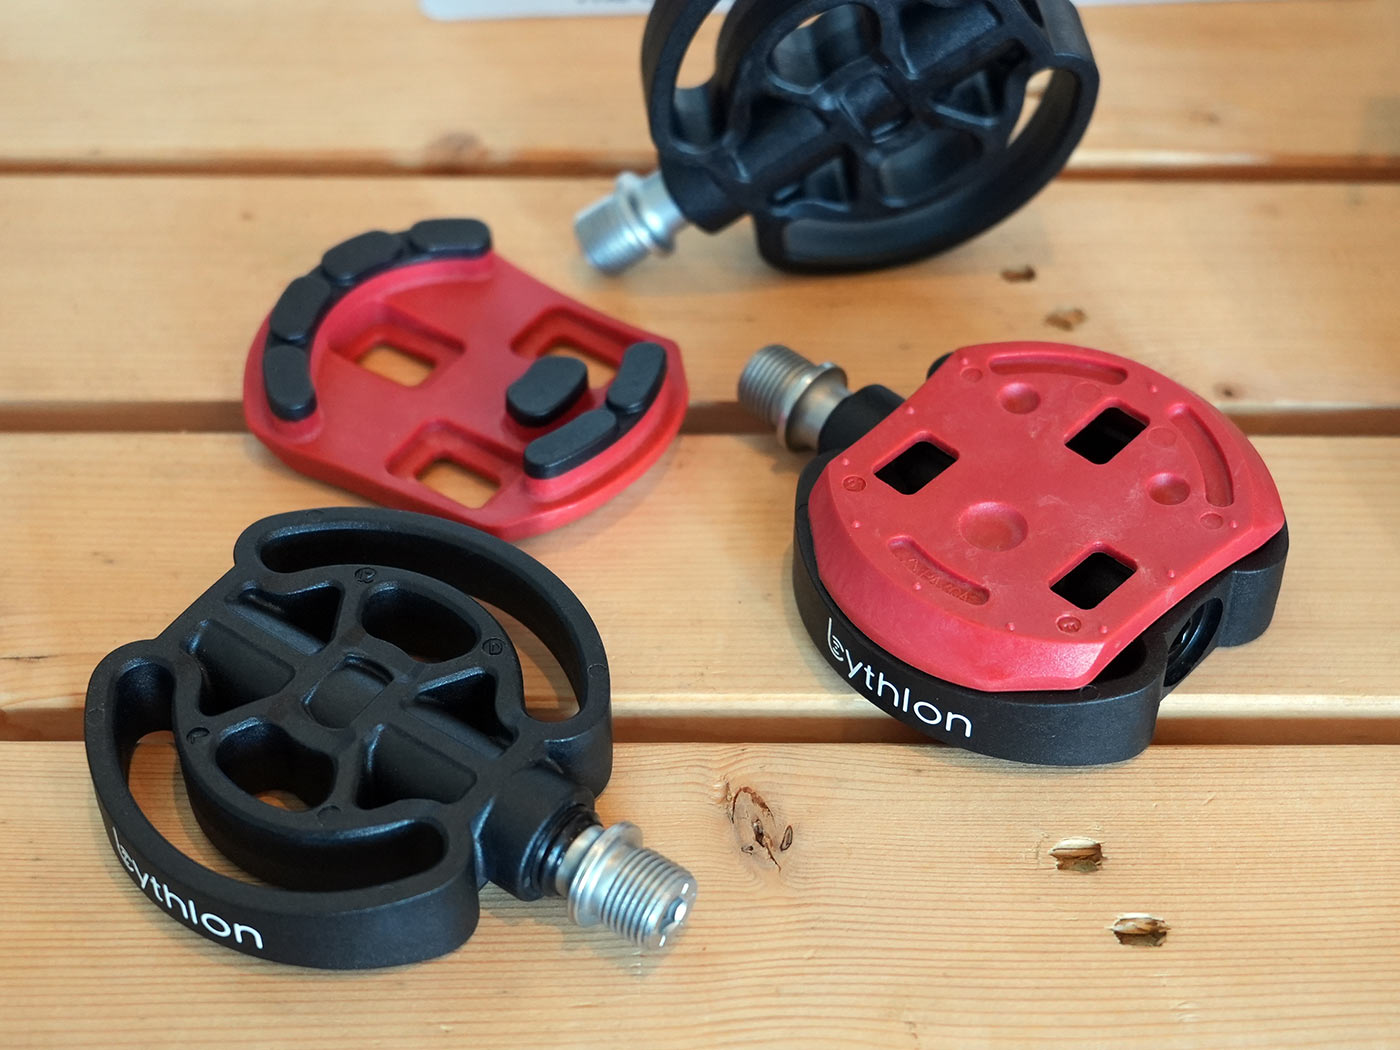 bythlon clipless pedals for beginners